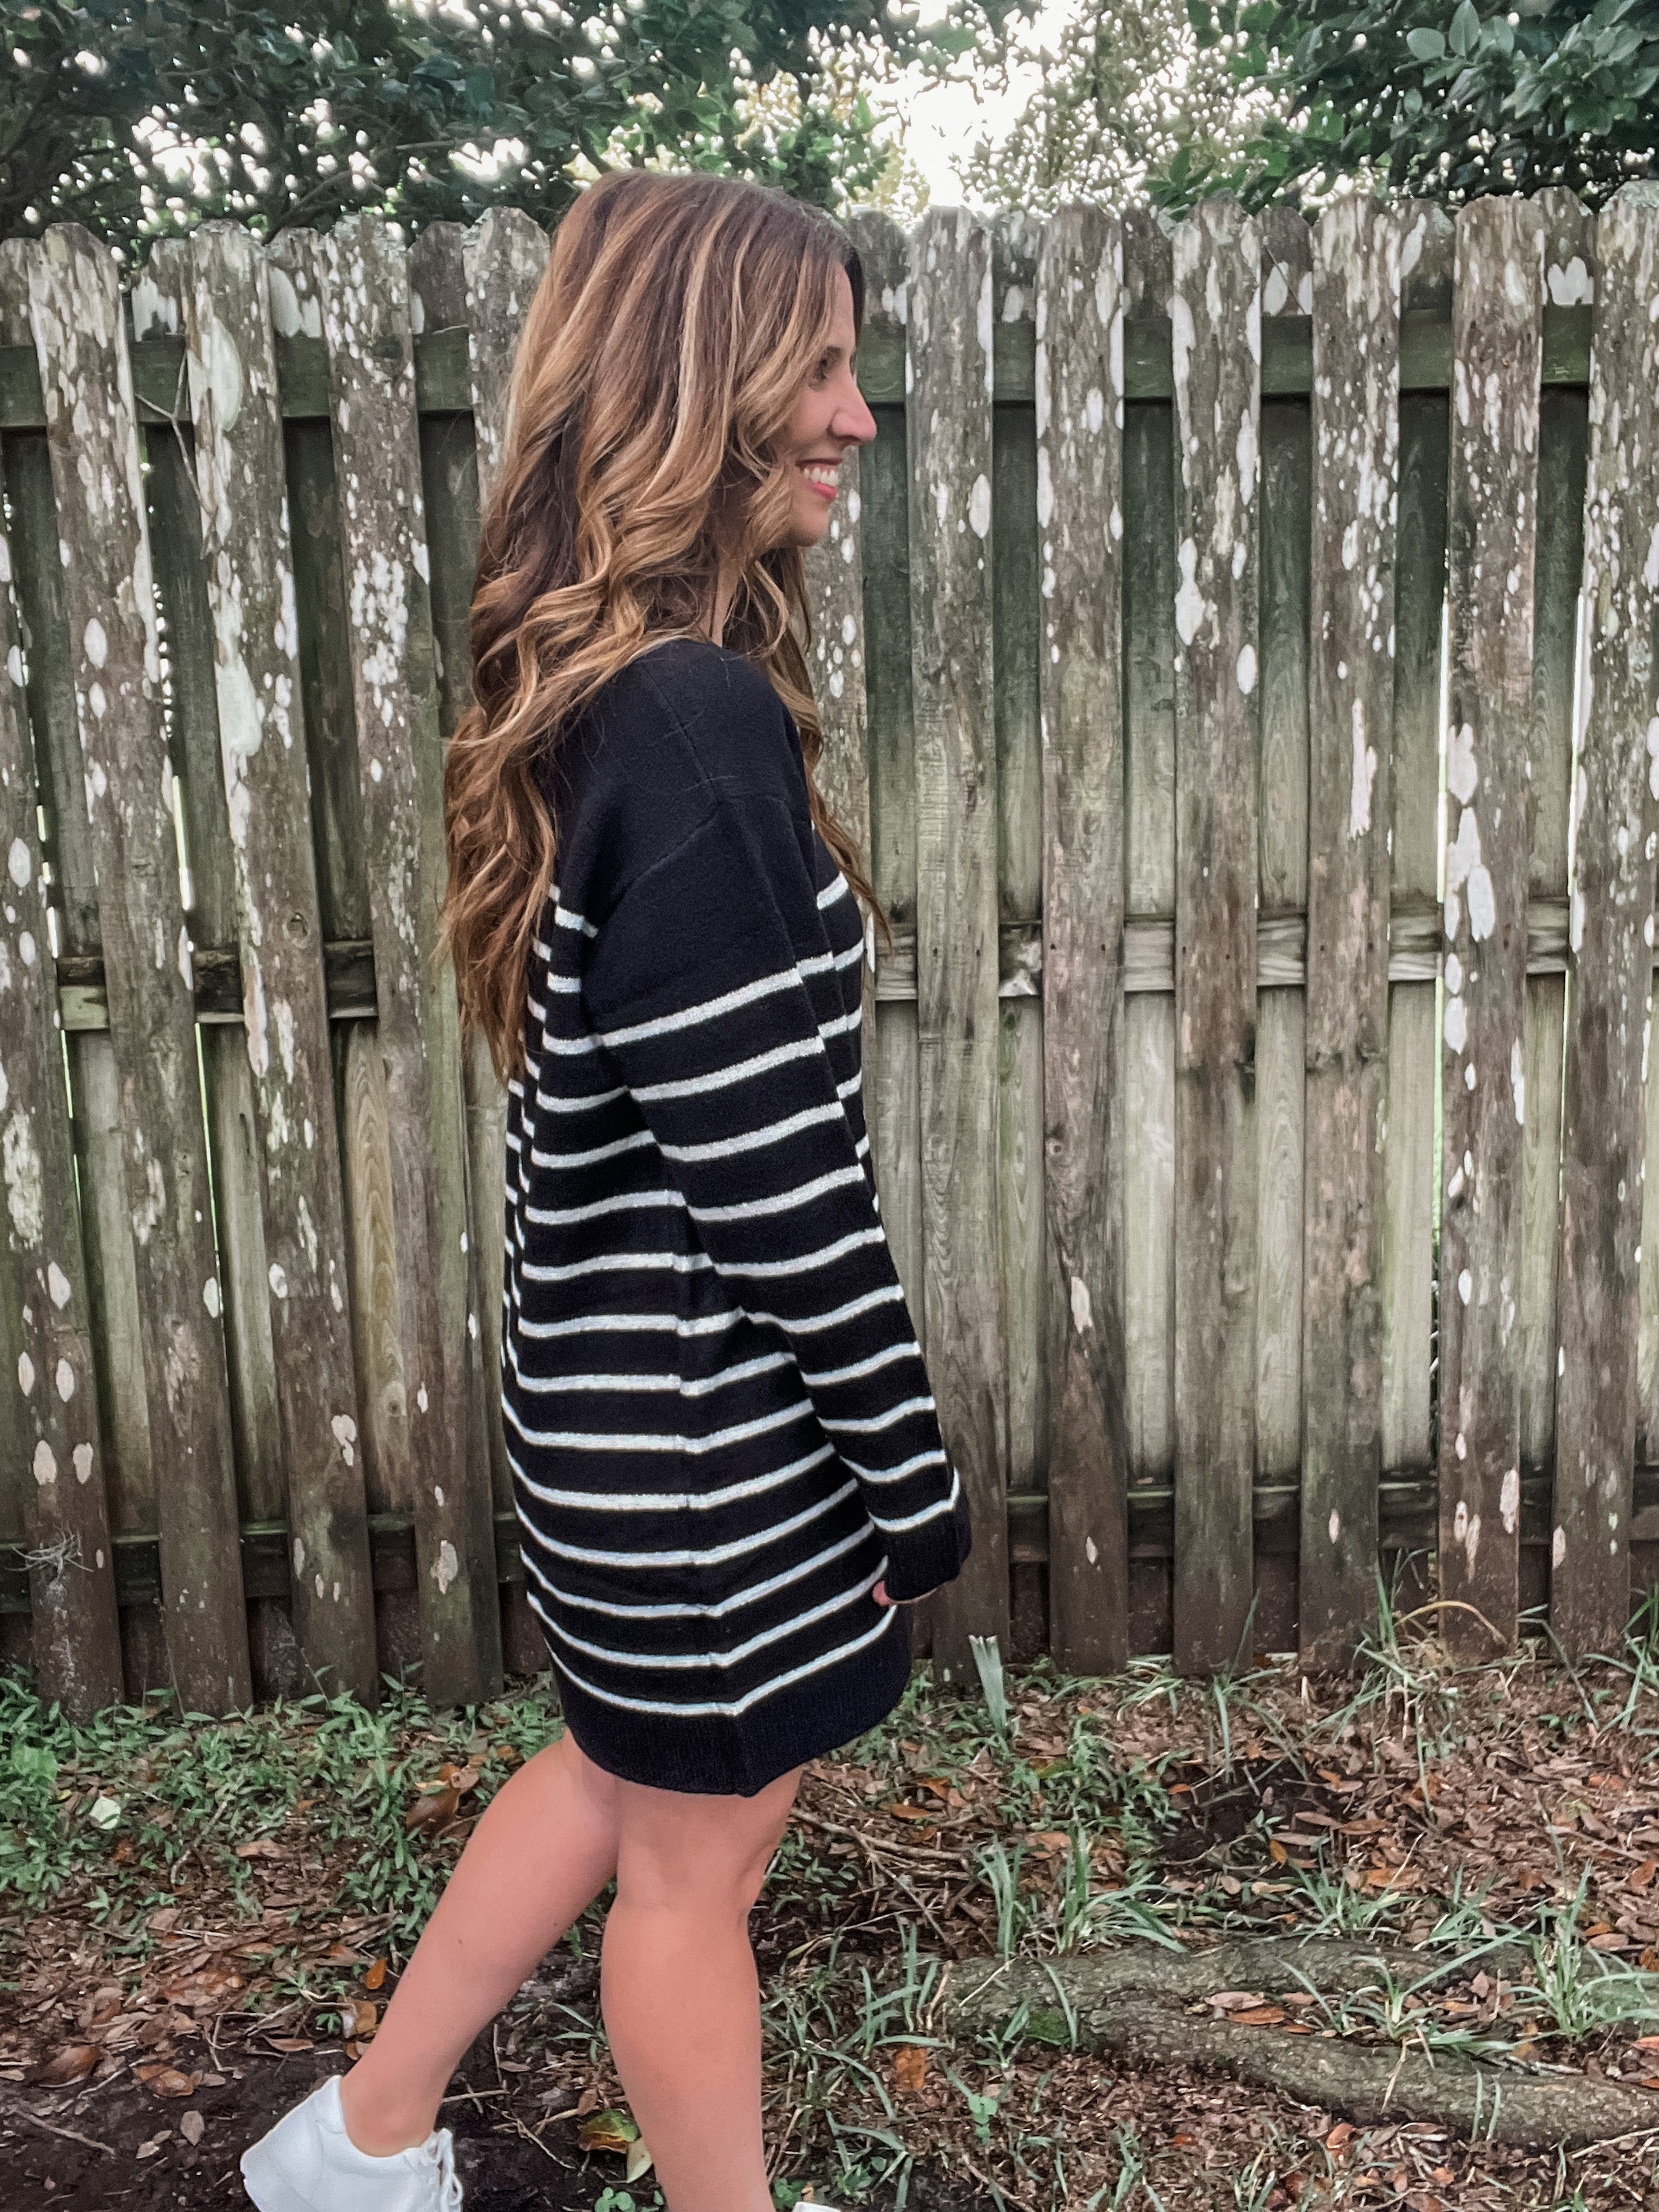 Casually Chic Striped Sweater Dress